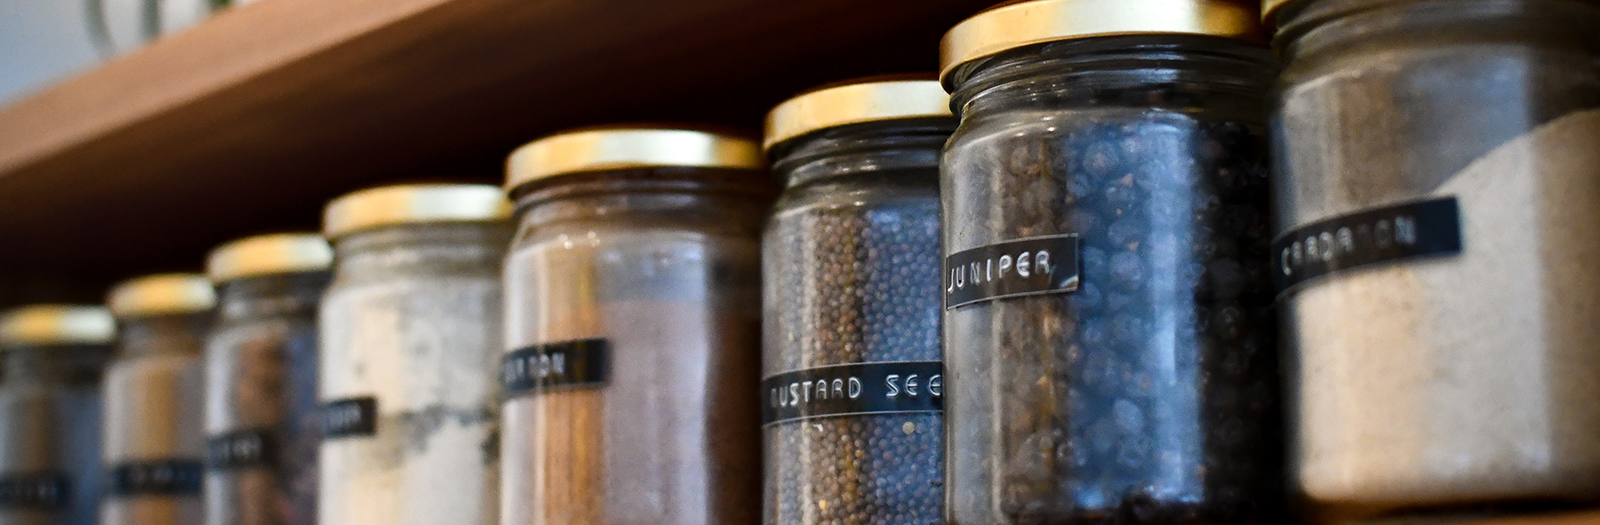 spices in reusable jars